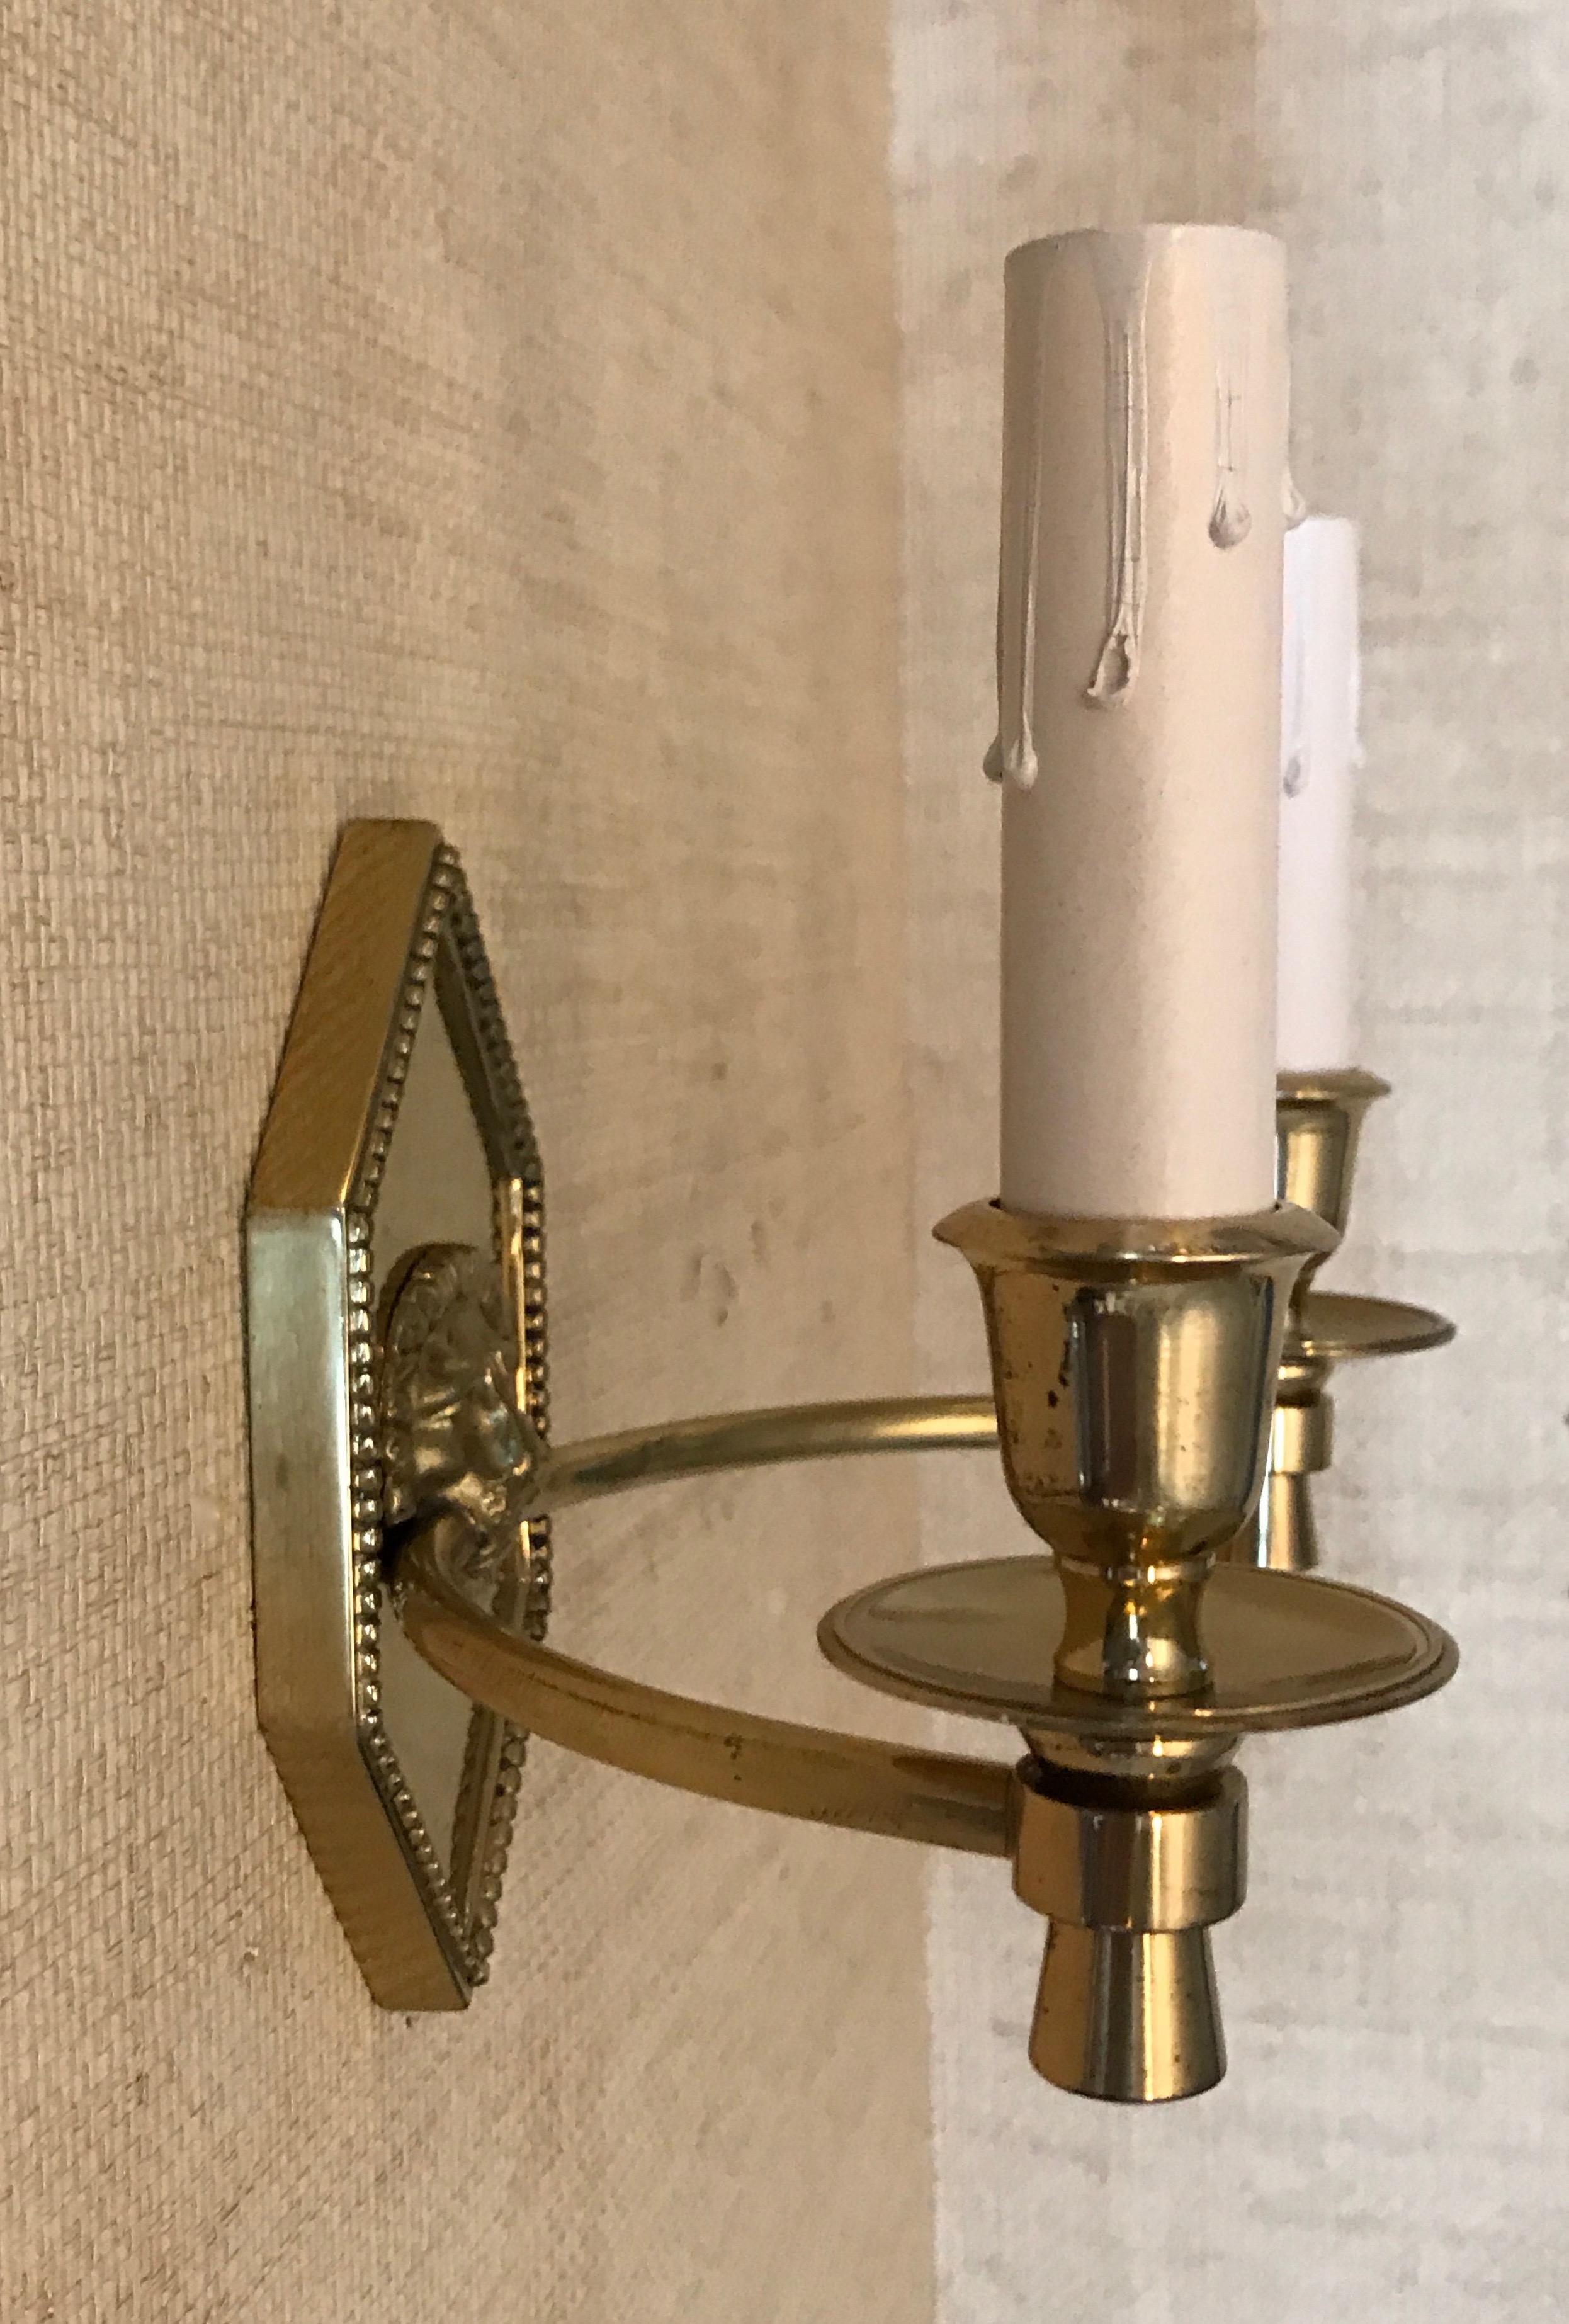 Pair of delicate French Empire style brass wall sconces with double arms on elongated hexagonal backplates with beaded detail and central lion motif. Rewired from US installations, each sconce uses 2 - 40 watt max incandescent bulbs or any wattage